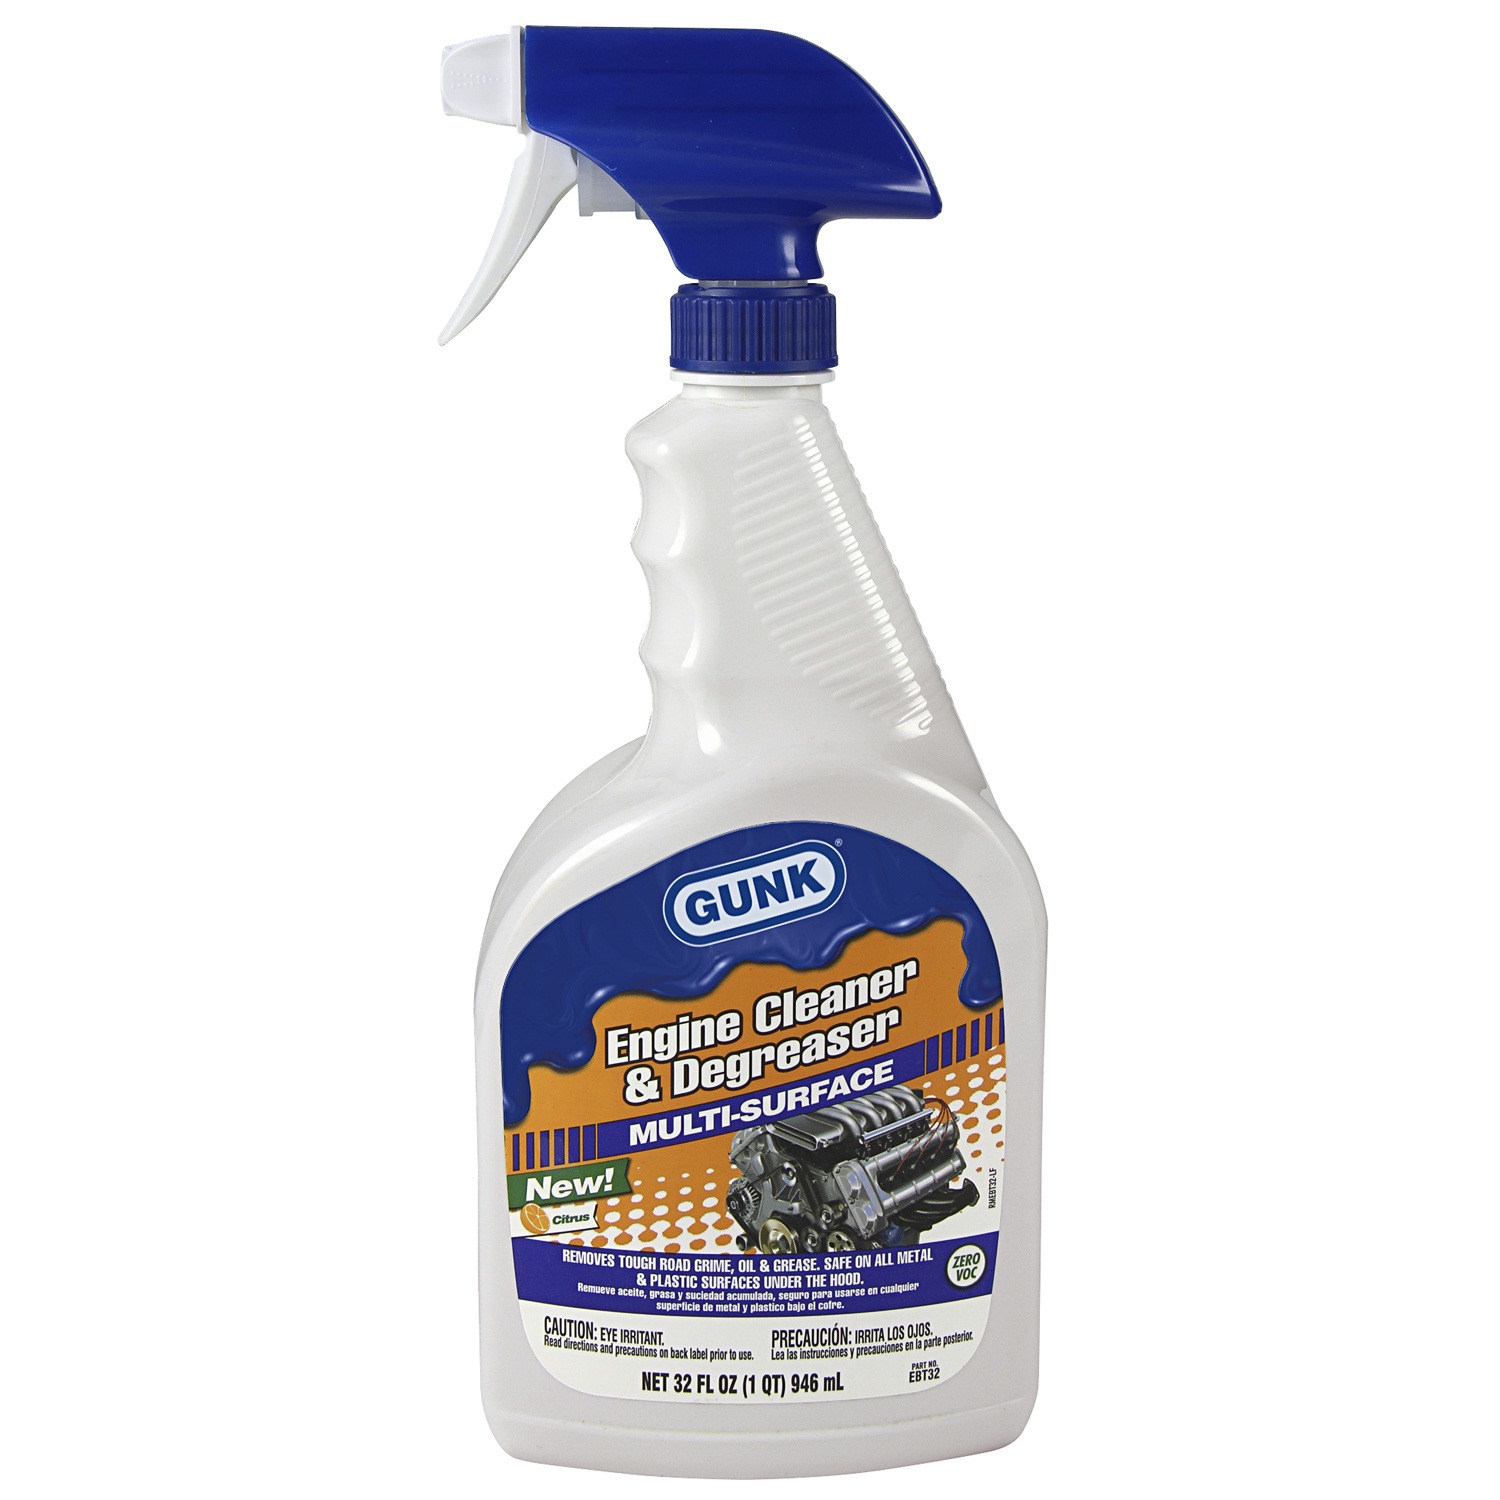 GUNK Engine Degreaser Can Safe, UNS Wholesale